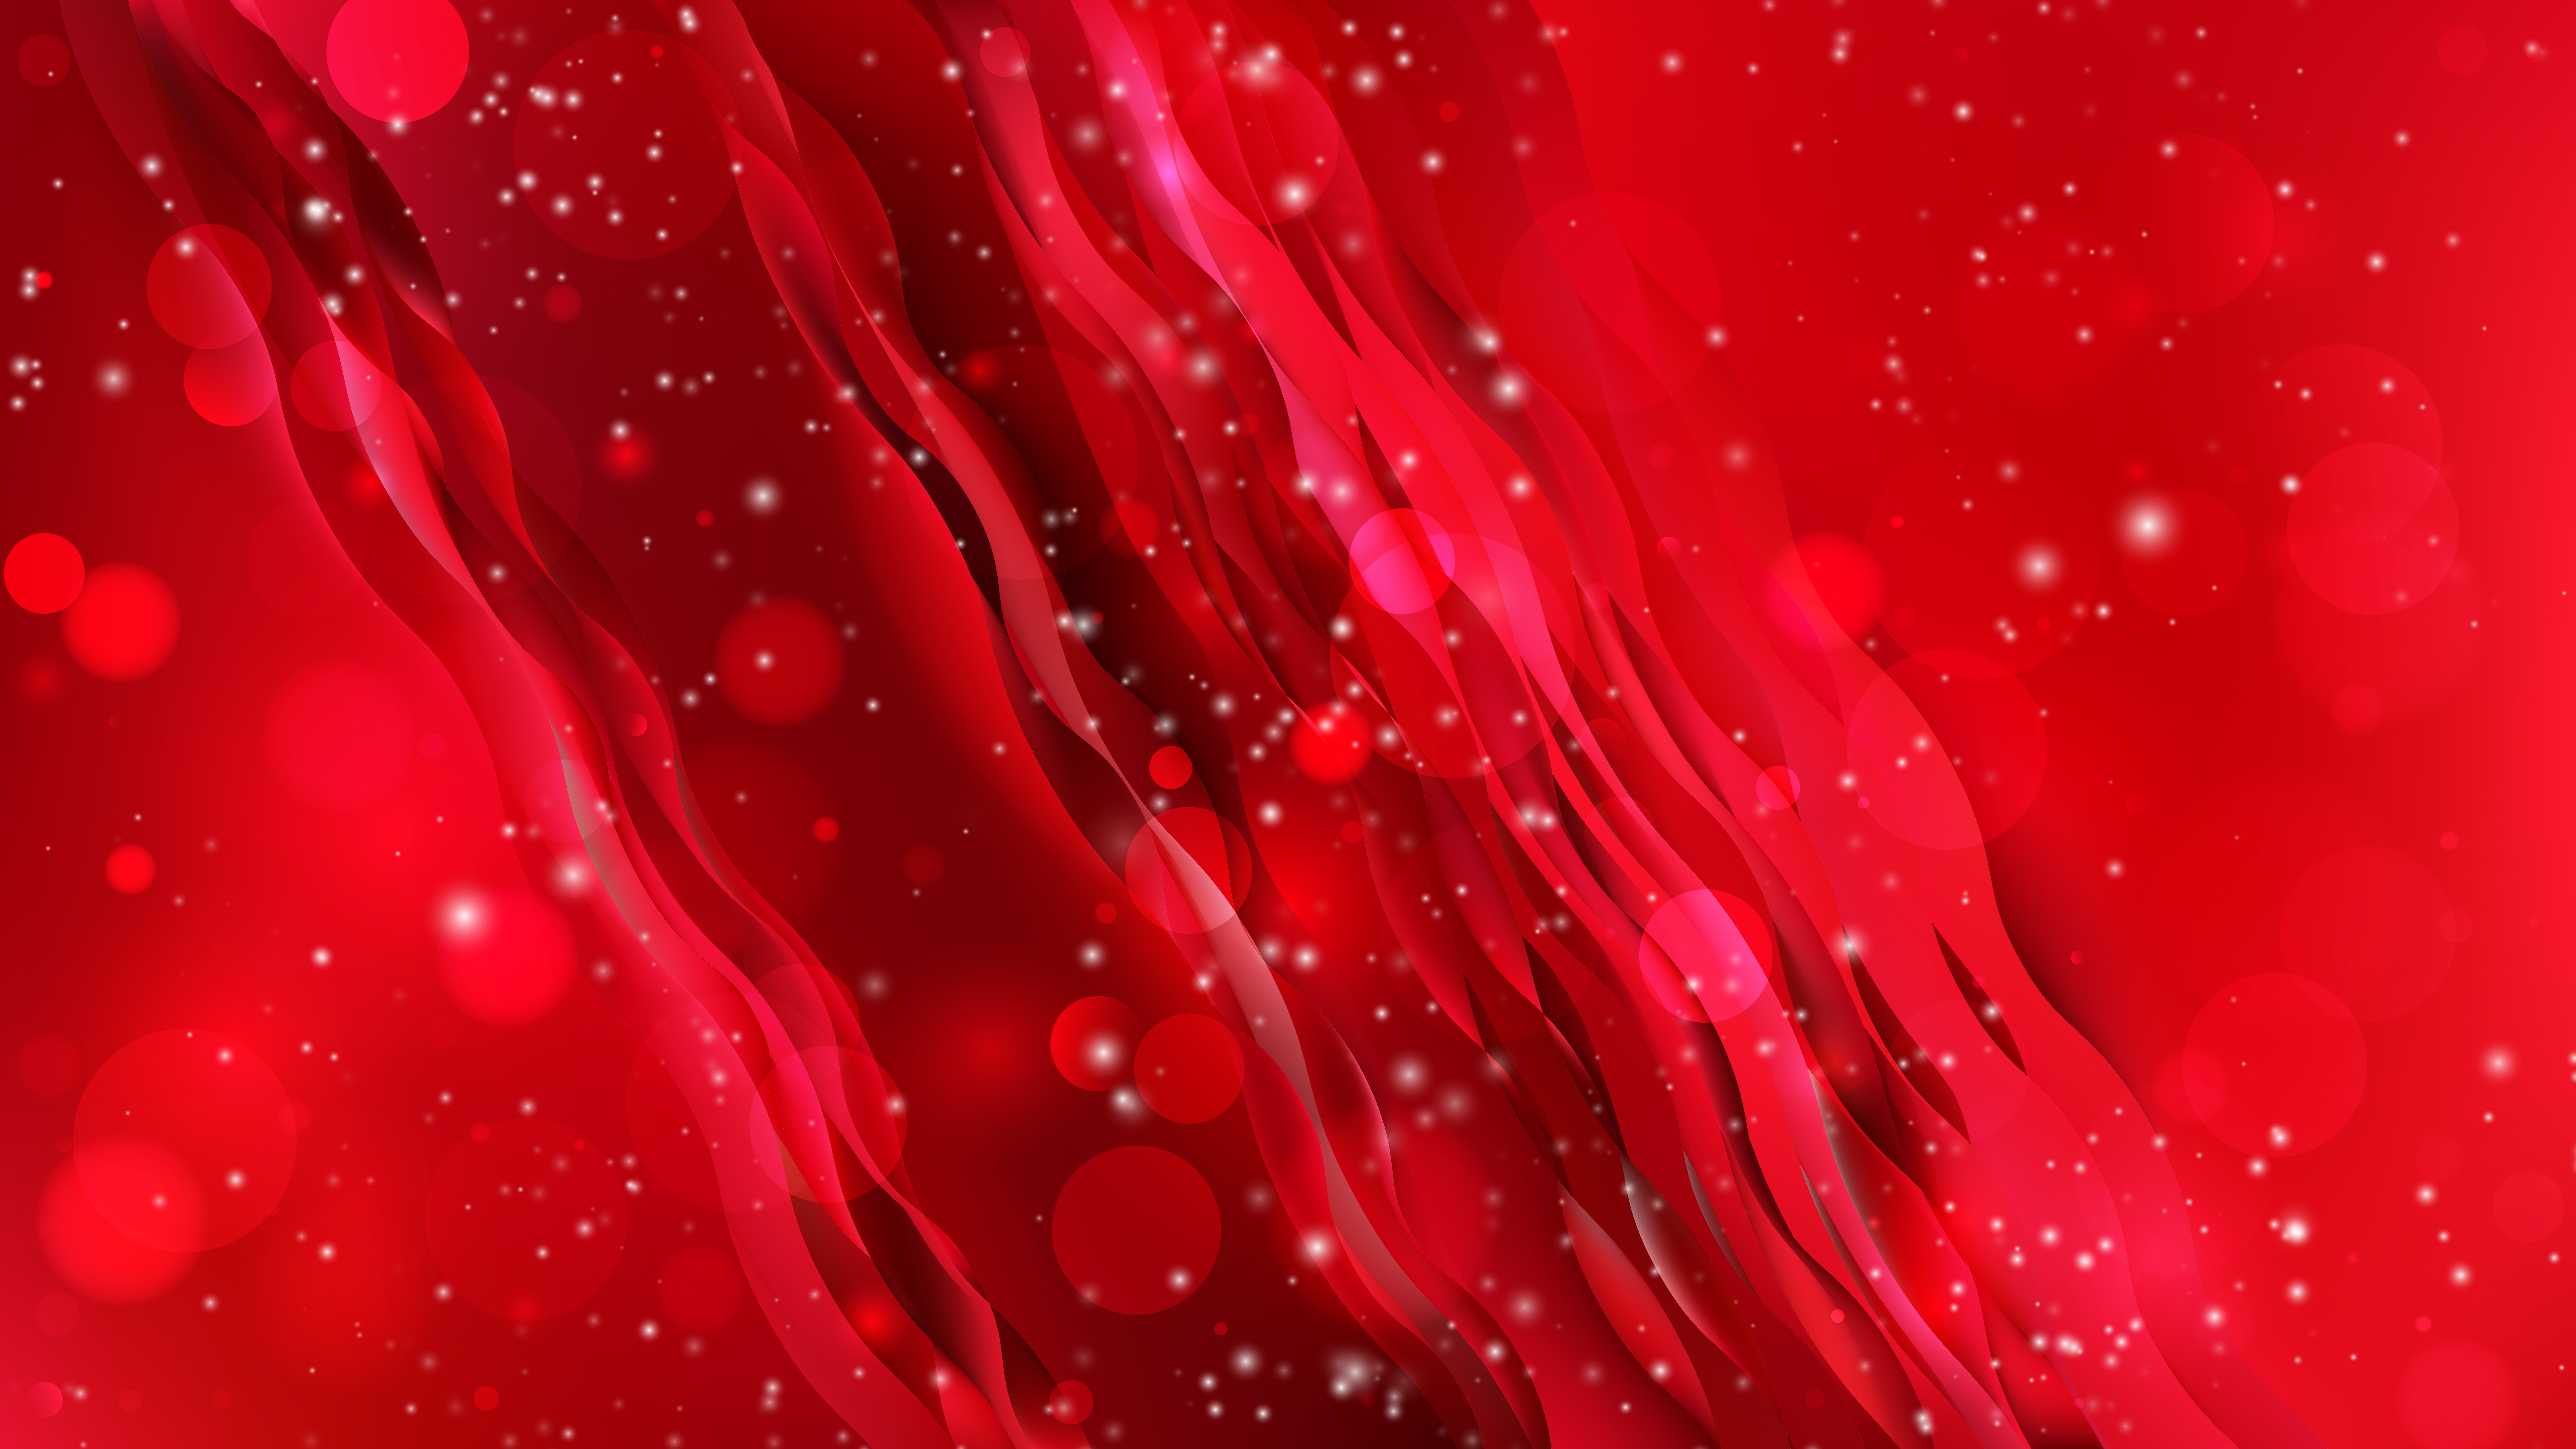 Windows 11 Wallpaper 4K Red abstract Stock 9058